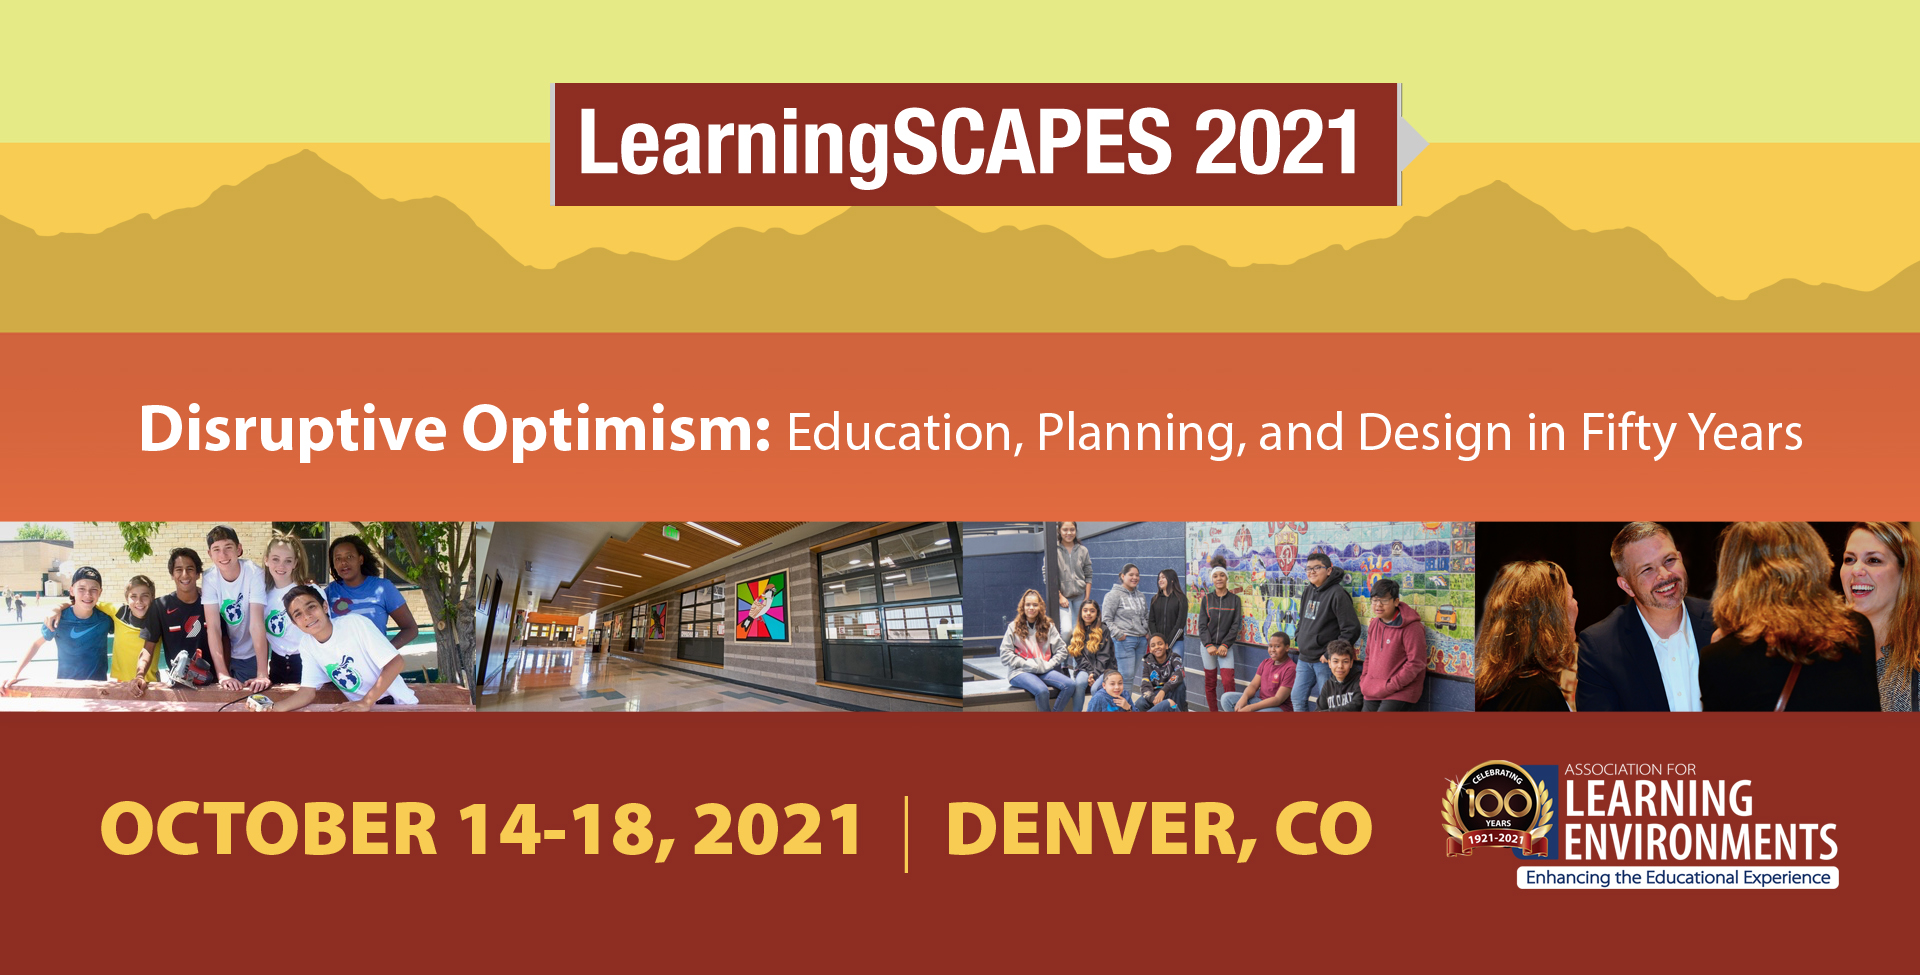 LearningSCAPES 2021 Conference Registration